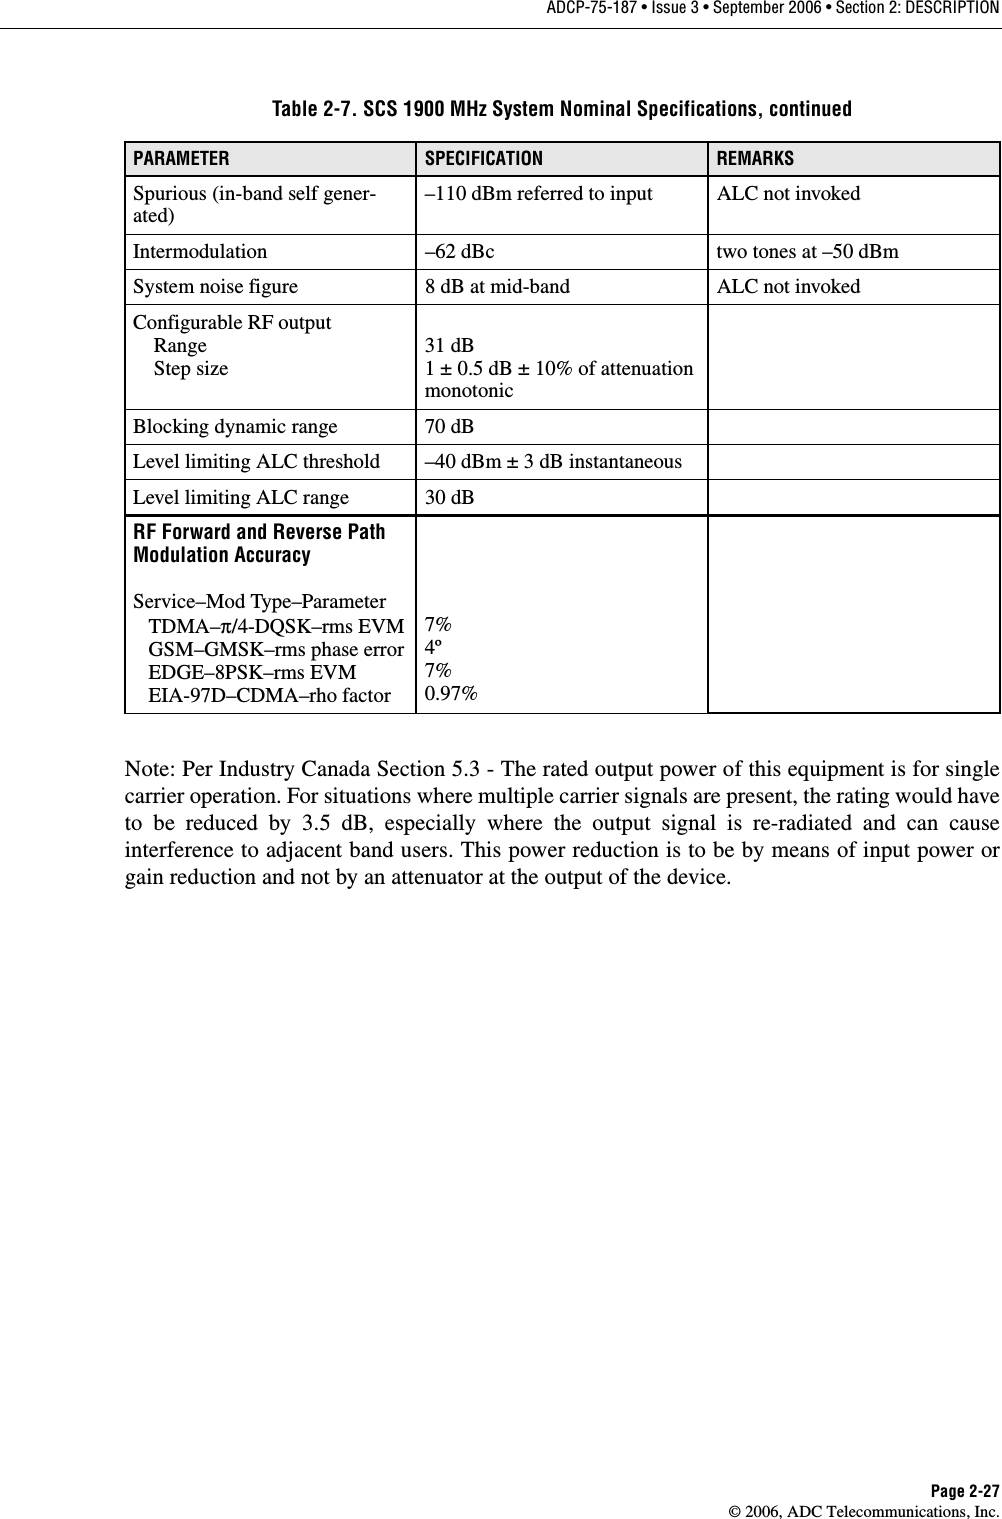 ADCP-75-187 • Issue 3 • September 2006 • Section 2: DESCRIPTIONPage 2-27© 2006, ADC Telecommunications, Inc.Note: Per Industry Canada Section 5.3 - The rated output power of this equipment is for singlecarrier operation. For situations where multiple carrier signals are present, the rating would haveto be reduced by 3.5 dB, especially where the output signal is re-radiated and can causeinterference to adjacent band users. This power reduction is to be by means of input power orgain reduction and not by an attenuator at the output of the device. Spurious (in-band self gener-ated)–110 dBm referred to input ALC not invokedIntermodulation –62 dBc  two tones at –50 dBmSystem noise figure 8 dB at mid-band ALC not invokedConfigurable RF output    Range    Step size31 dB1 ± 0.5 dB ± 10% of attenuation monotonicBlocking dynamic range 70 dBLevel limiting ALC threshold –40 dBm ± 3 dB instantaneousLevel limiting ALC range 30 dBRF Forward and Reverse Path Modulation AccuracyService–Mod Type–Parameter   TDMA–π/4-DQSK–rms EVM   GSM–GMSK–rms phase error   EDGE–8PSK–rms EVM   EIA-97D–CDMA–rho factor7%4º7%0.97%Table 2-7. SCS 1900 MHz System Nominal Specifications, continuedPARAMETER SPECIFICATION REMARKS